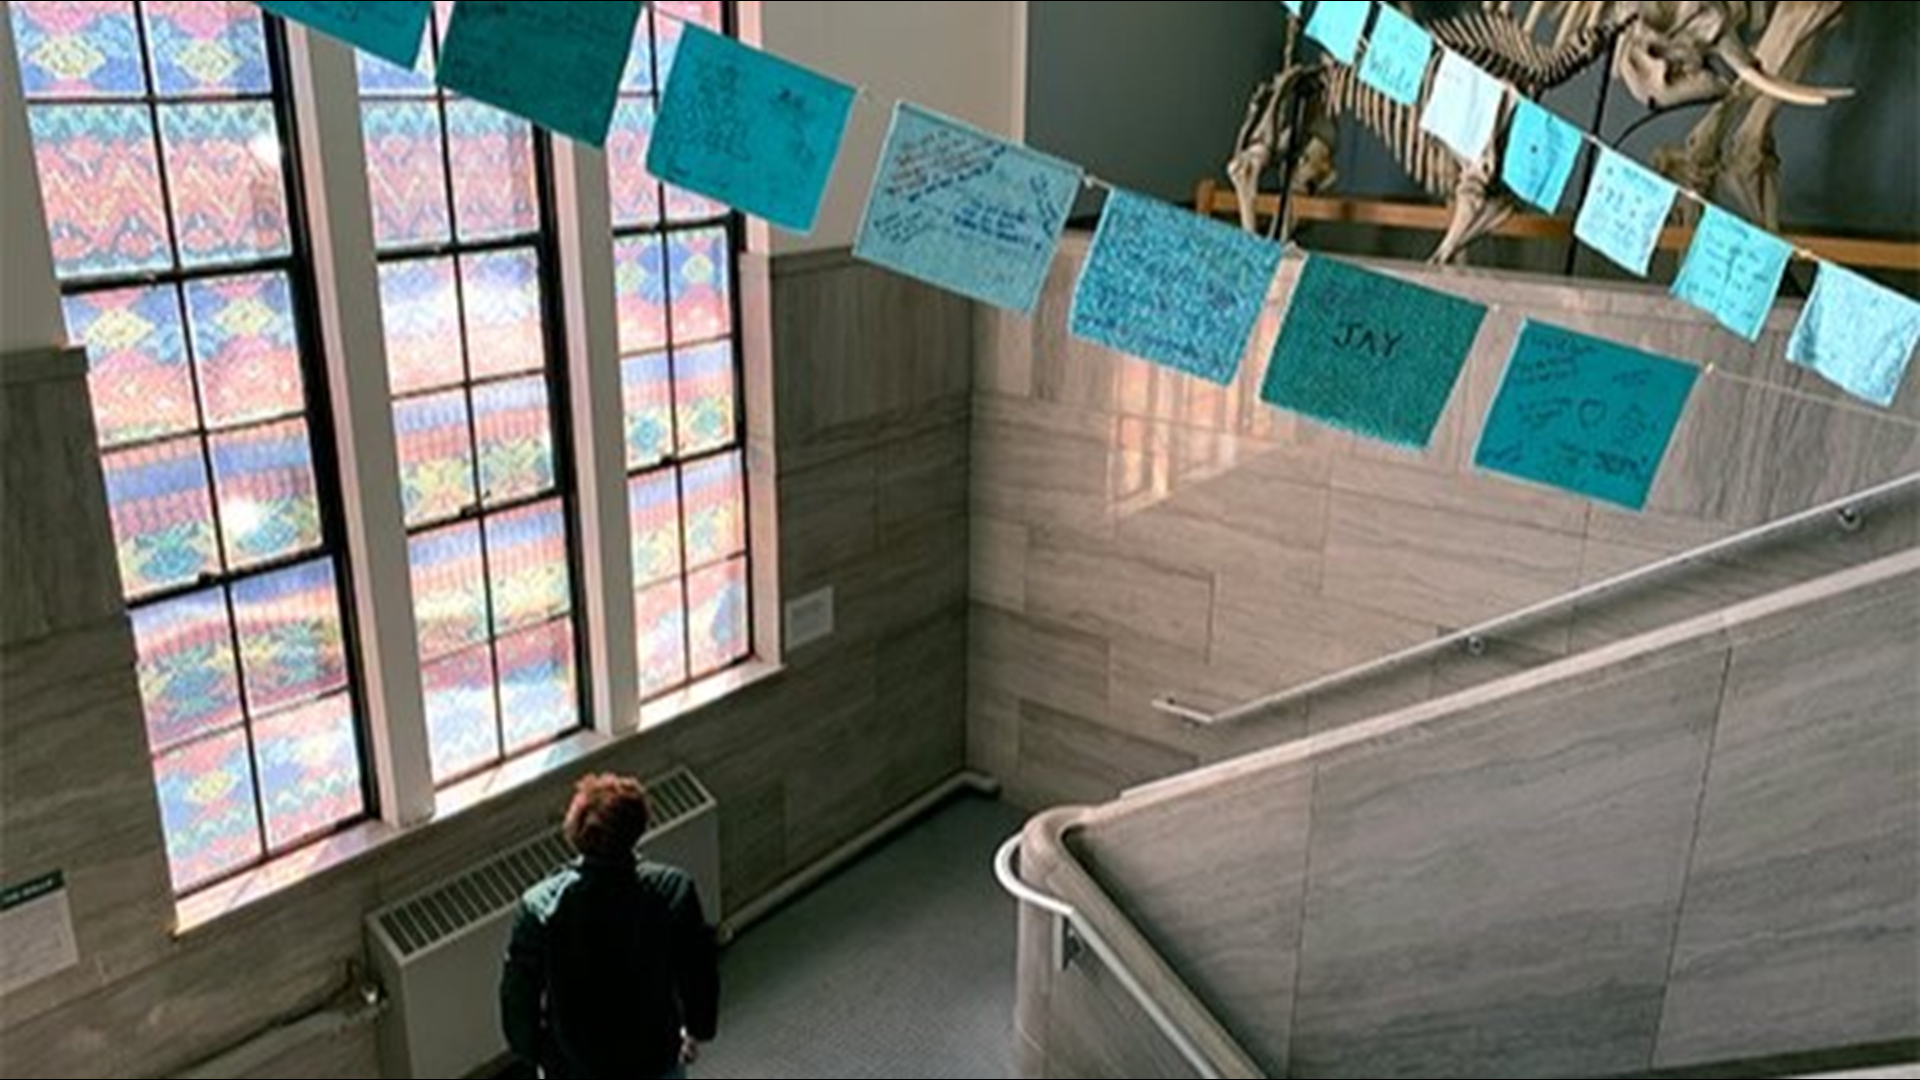 "Finding Our Voice: Sister Survivors Speak" opens Tuesday. The exhibit incorporates and is inspired by teal ribbons that were tied to trees around campus as a reminder of the survivors.